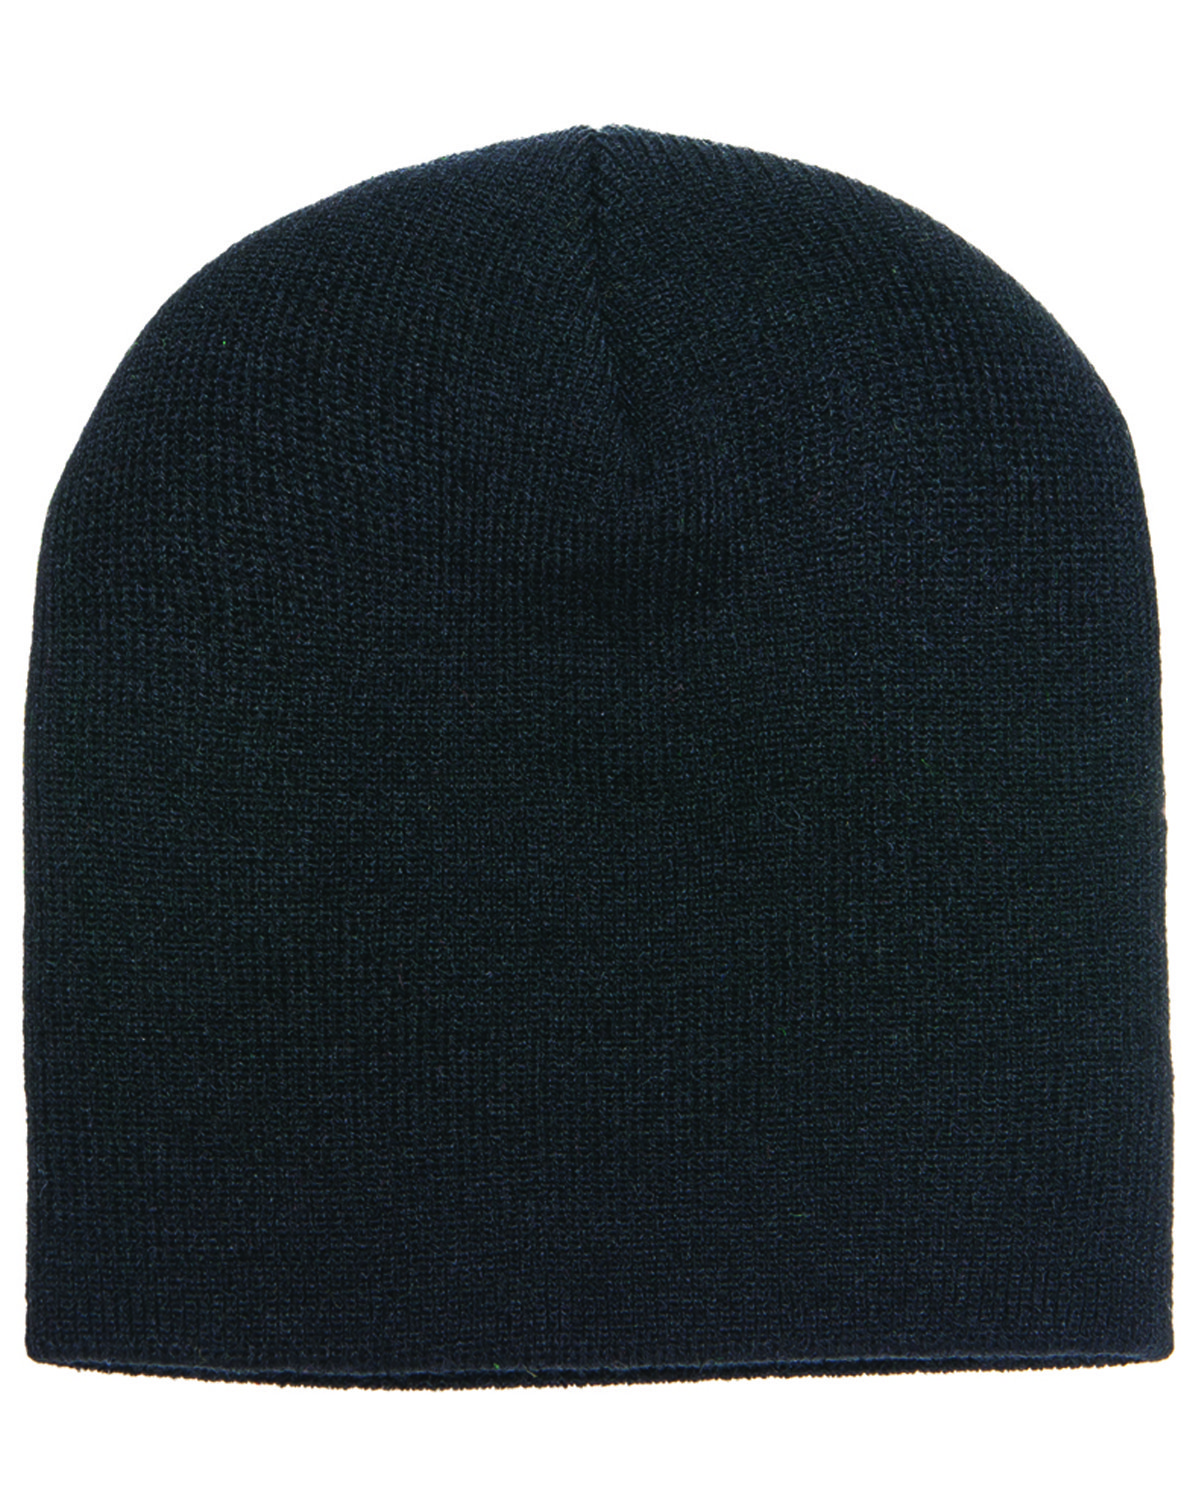 | Adult alphabroder Yupoong Knit Beanie